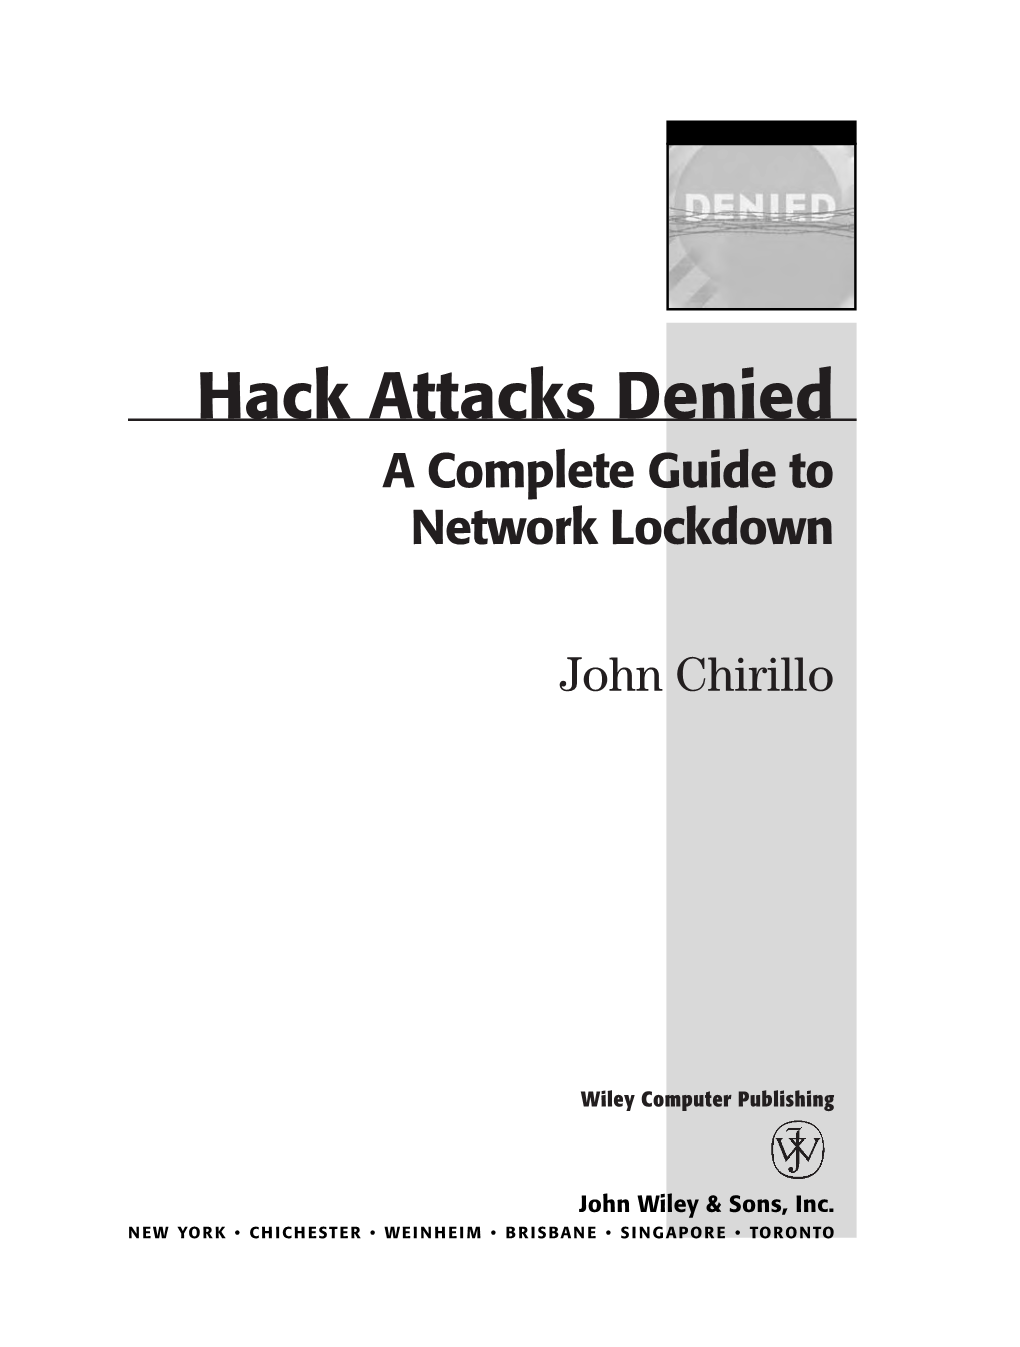 Hack Attacks Denied a Complete Guide to Network Lockdown